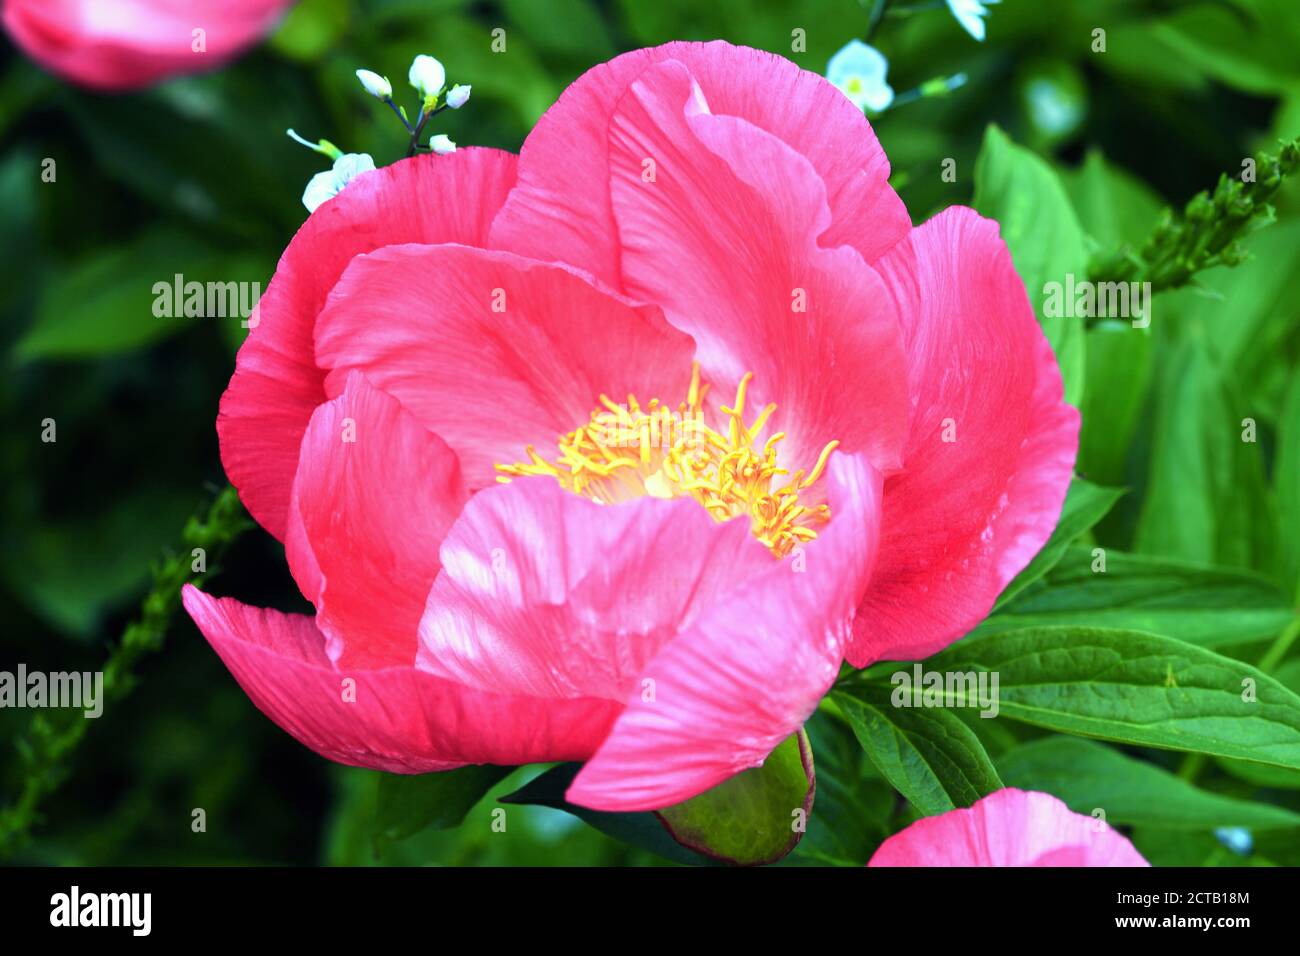 Pink peony (peonia) a spring summer flower perennial herbaceous plant native of Asia and North America stock photo image Stock Photo